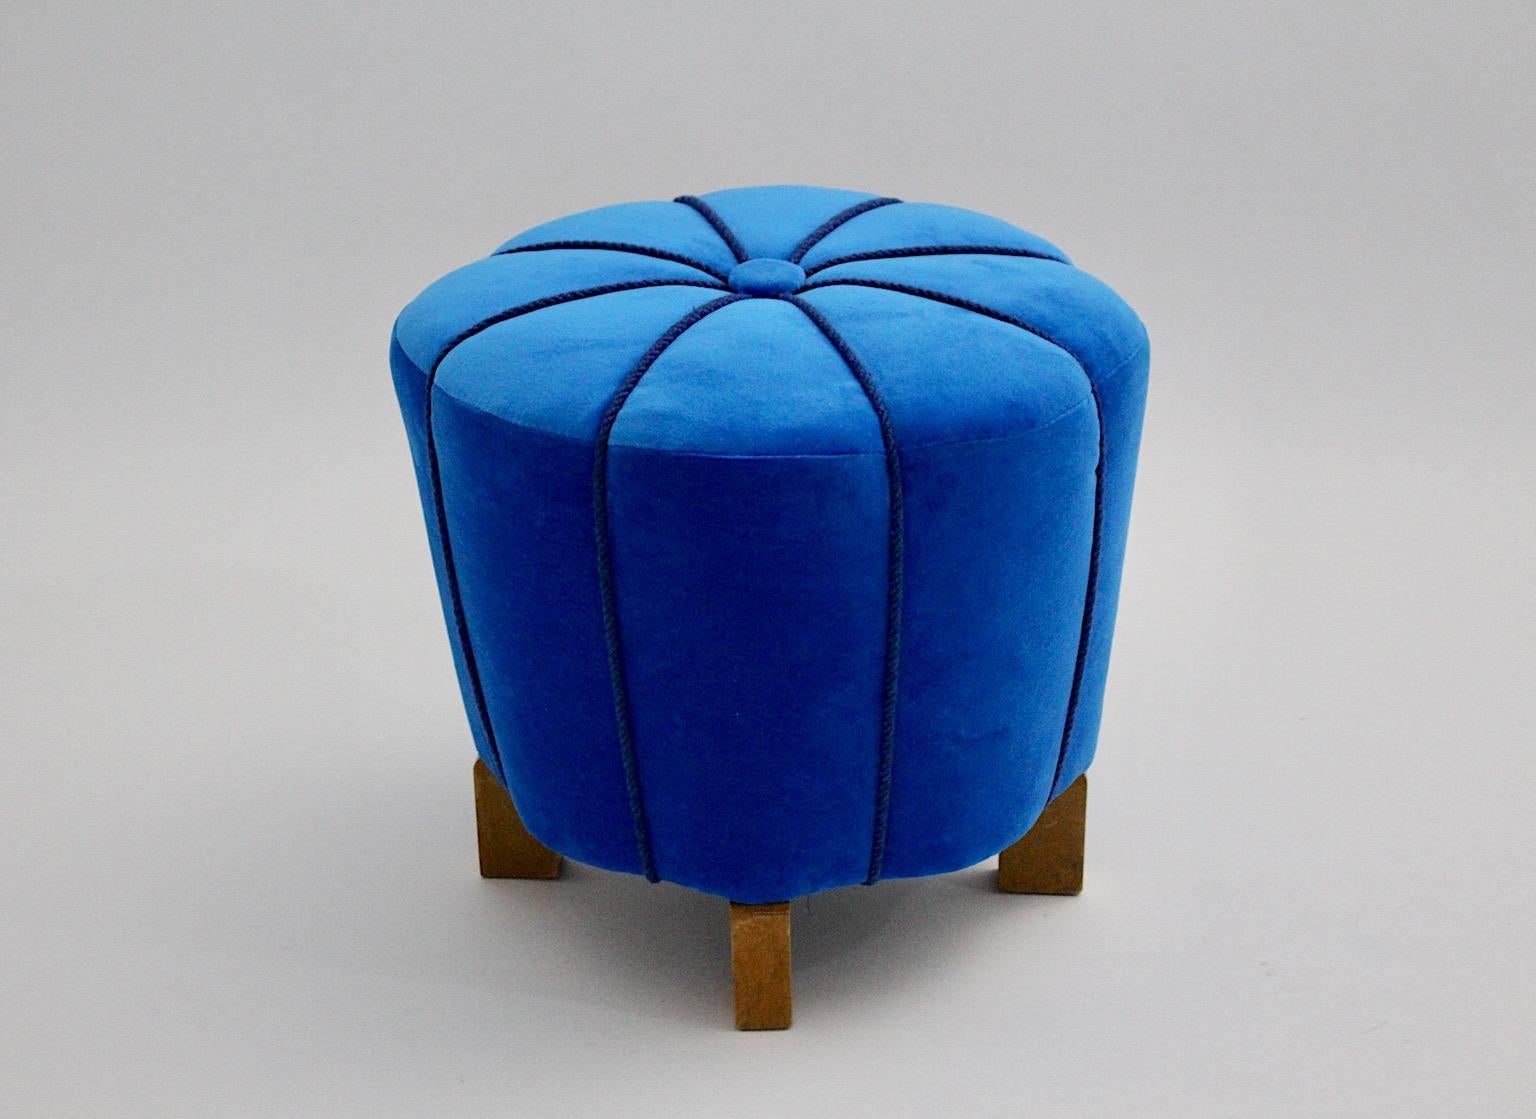 Art Deco vintage pouf or stool stellar - like from beech and velvet cover with blue cords 1930s Vienna.
An amazing vintage pouf or stool or footstool in beautiful stellar shape new covered with vivid blue velvet and blue cords.
This freestanding